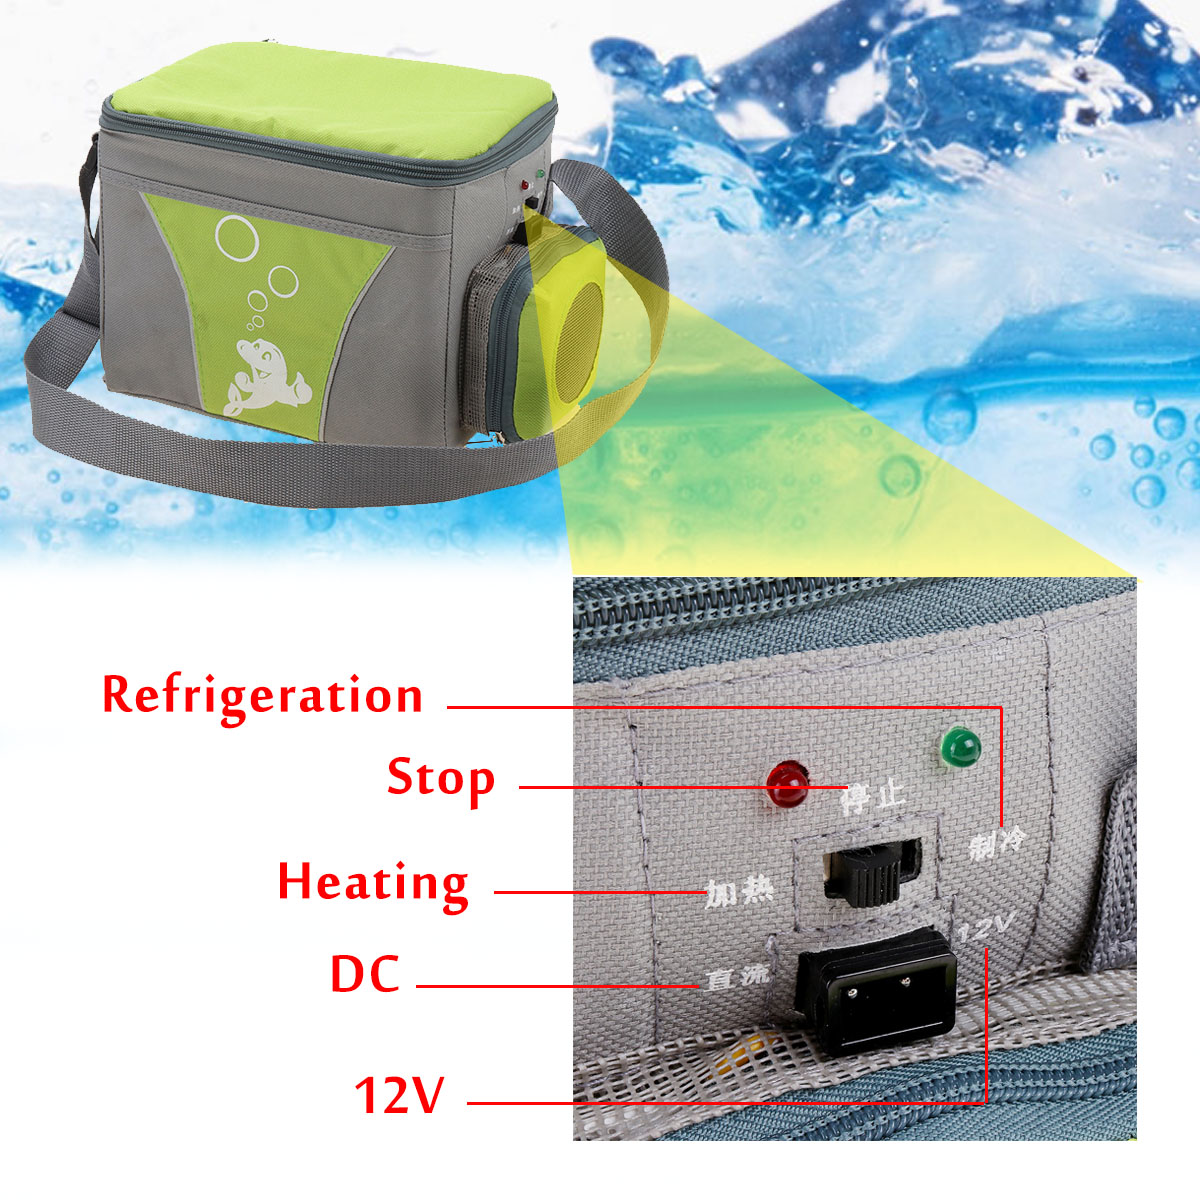 12V 6L Mini Car Refrigerator 2 In 1 Less Noise Car Cooling Heating Box Fridge for Cars Home Camping 16